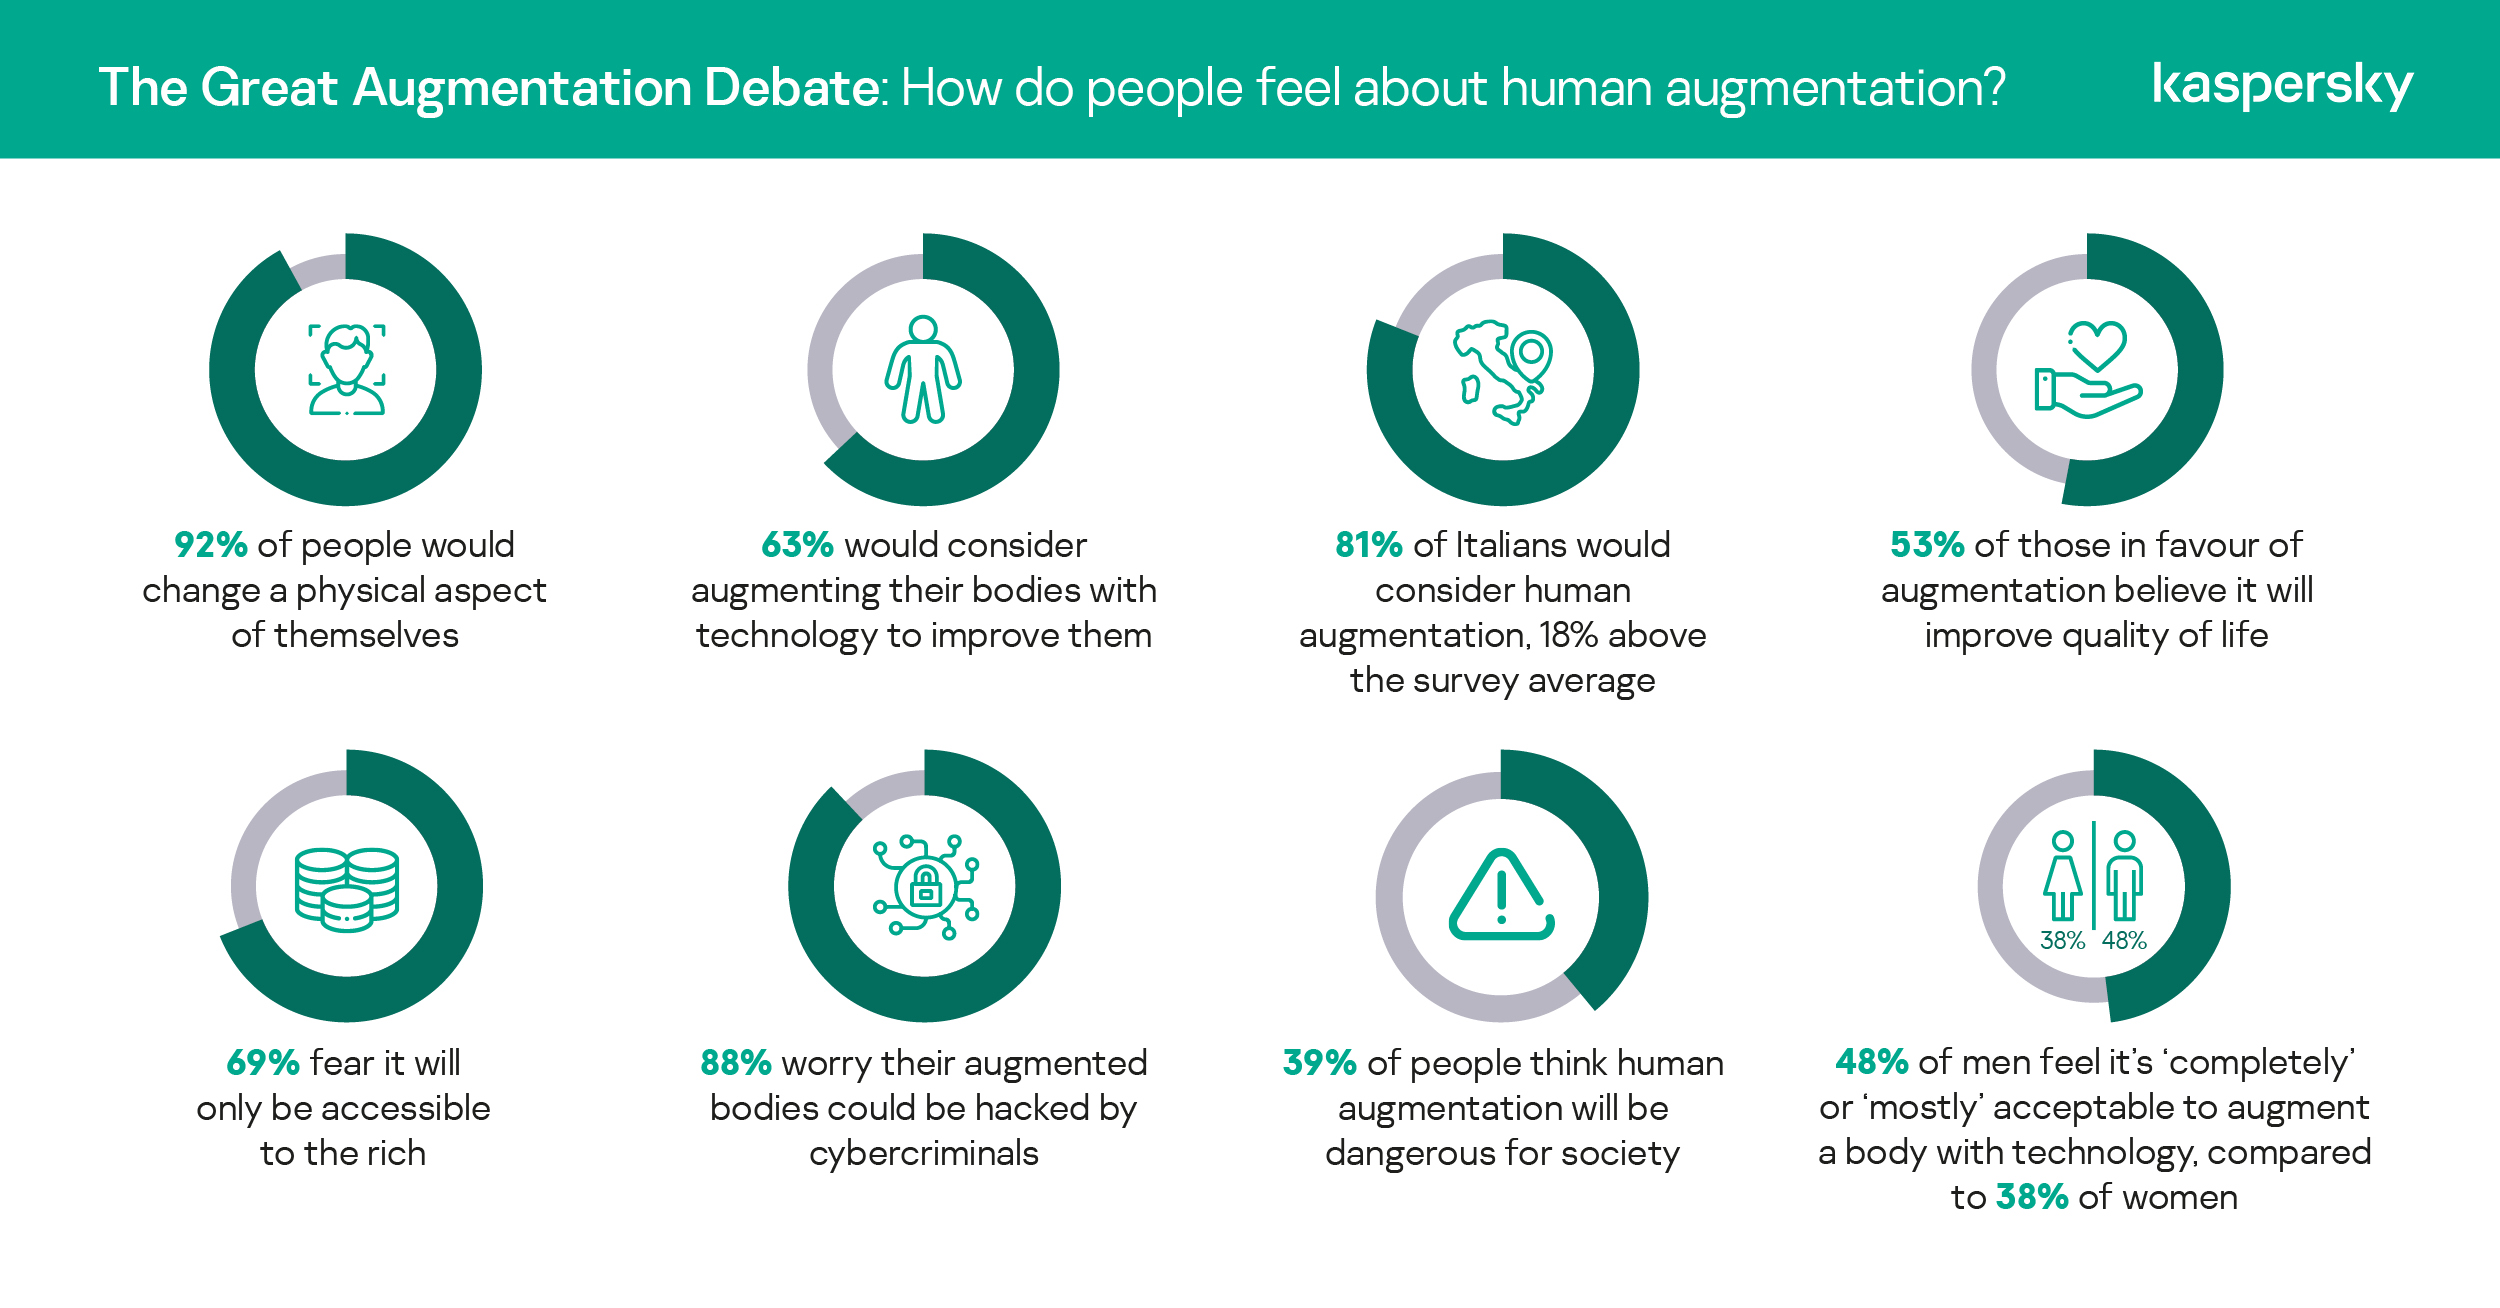 Kaspersky The Great Augmentation Debate Infographic